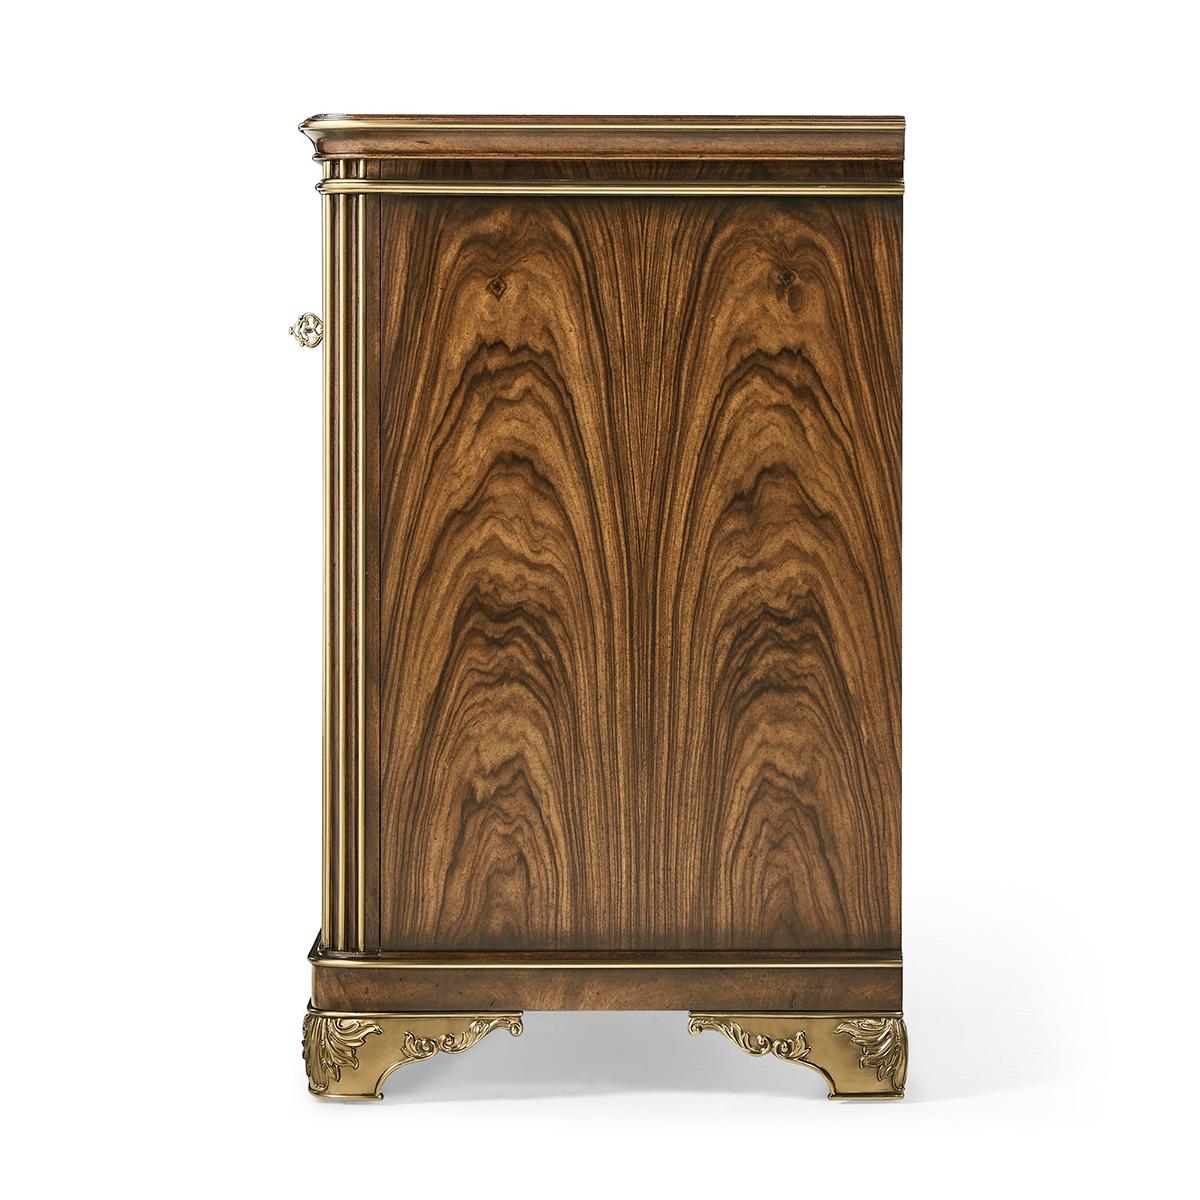 Neoclassical Neo Classic Inspired Chest For Sale